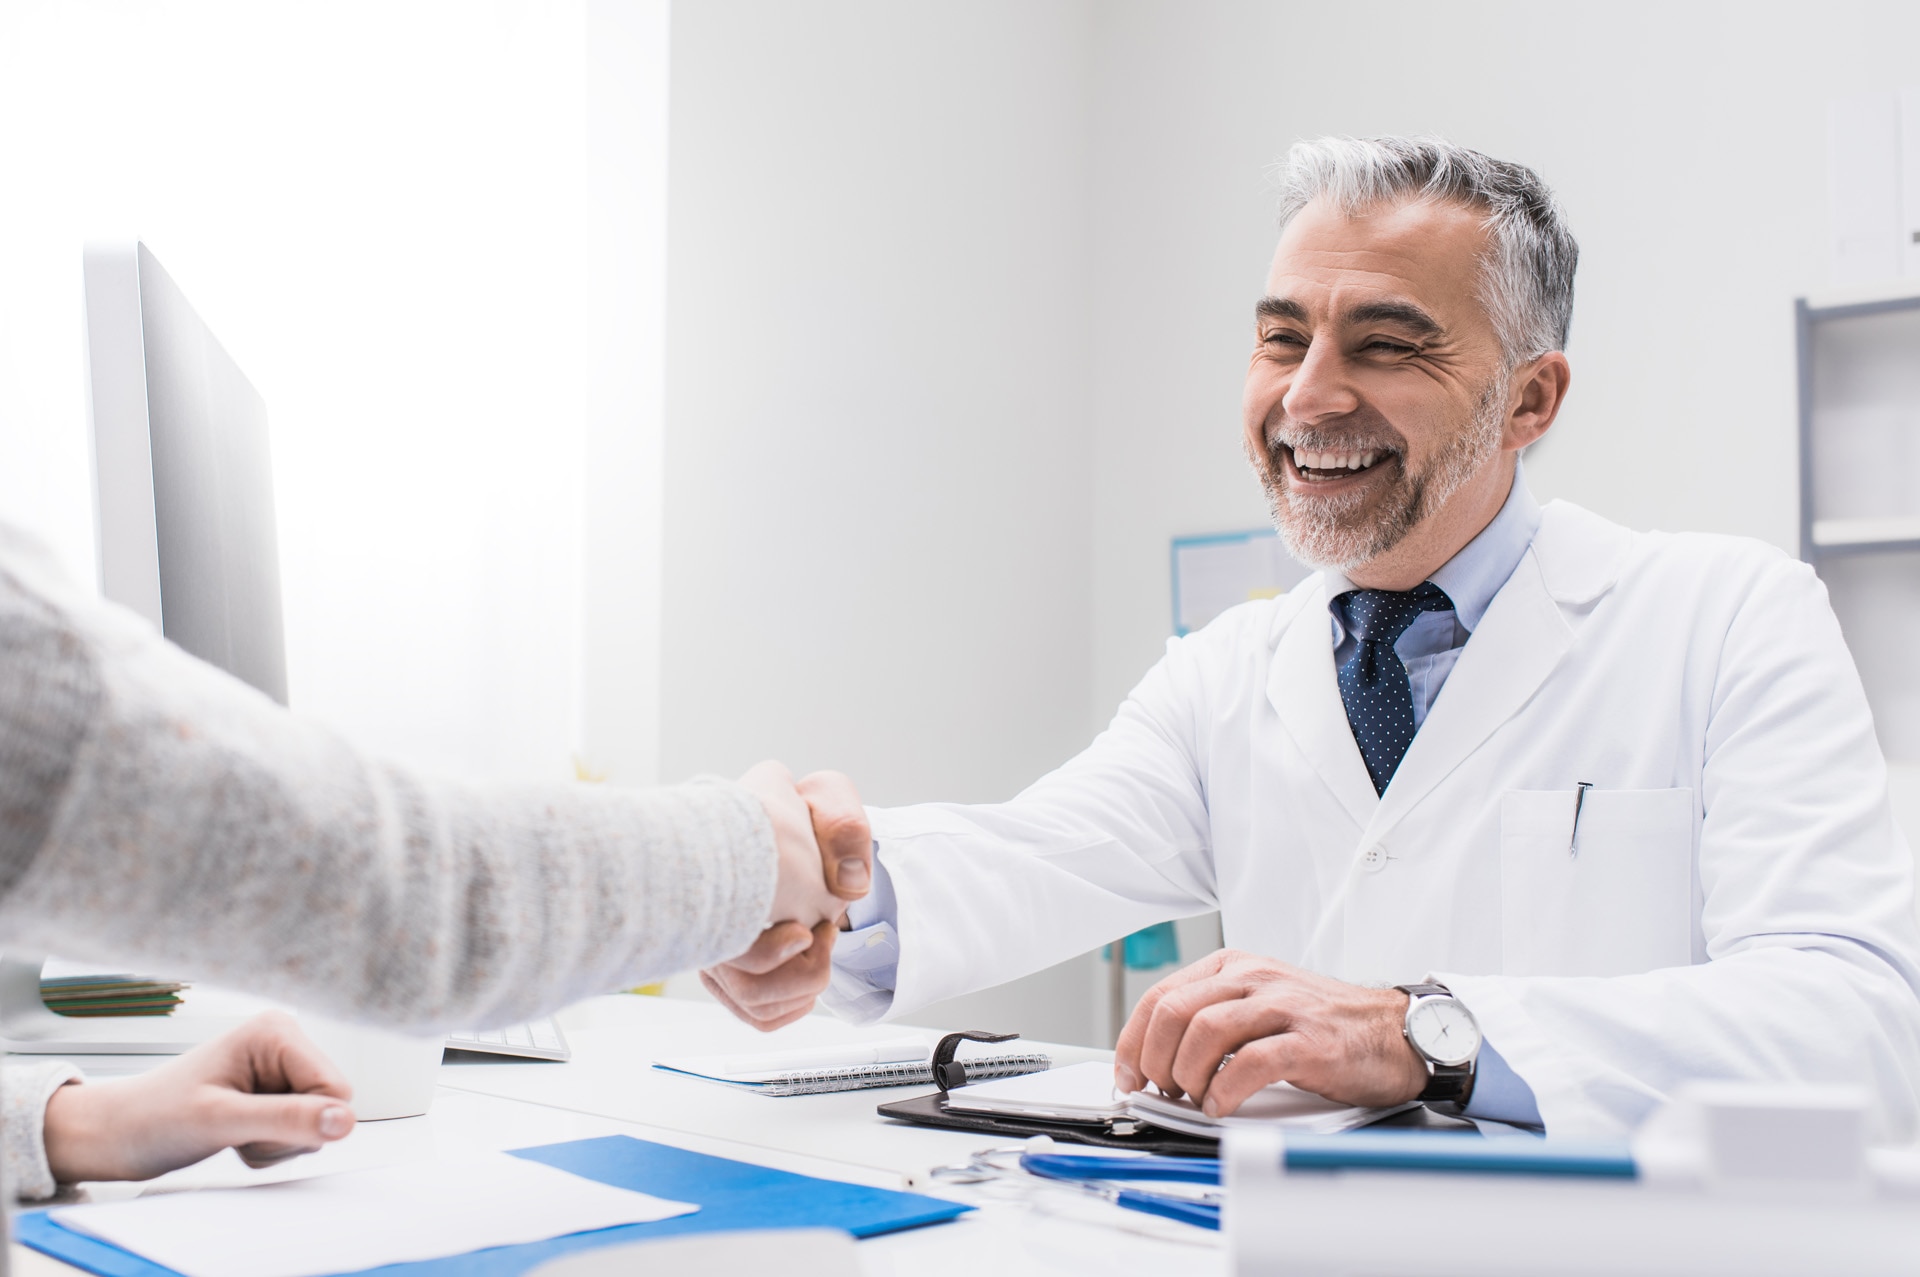 Smiling doctor and female patient shaking hands, healthcare professionals concept; Shutterstock ID 704550271; purchase_order: -; job: -; client: -; other: -